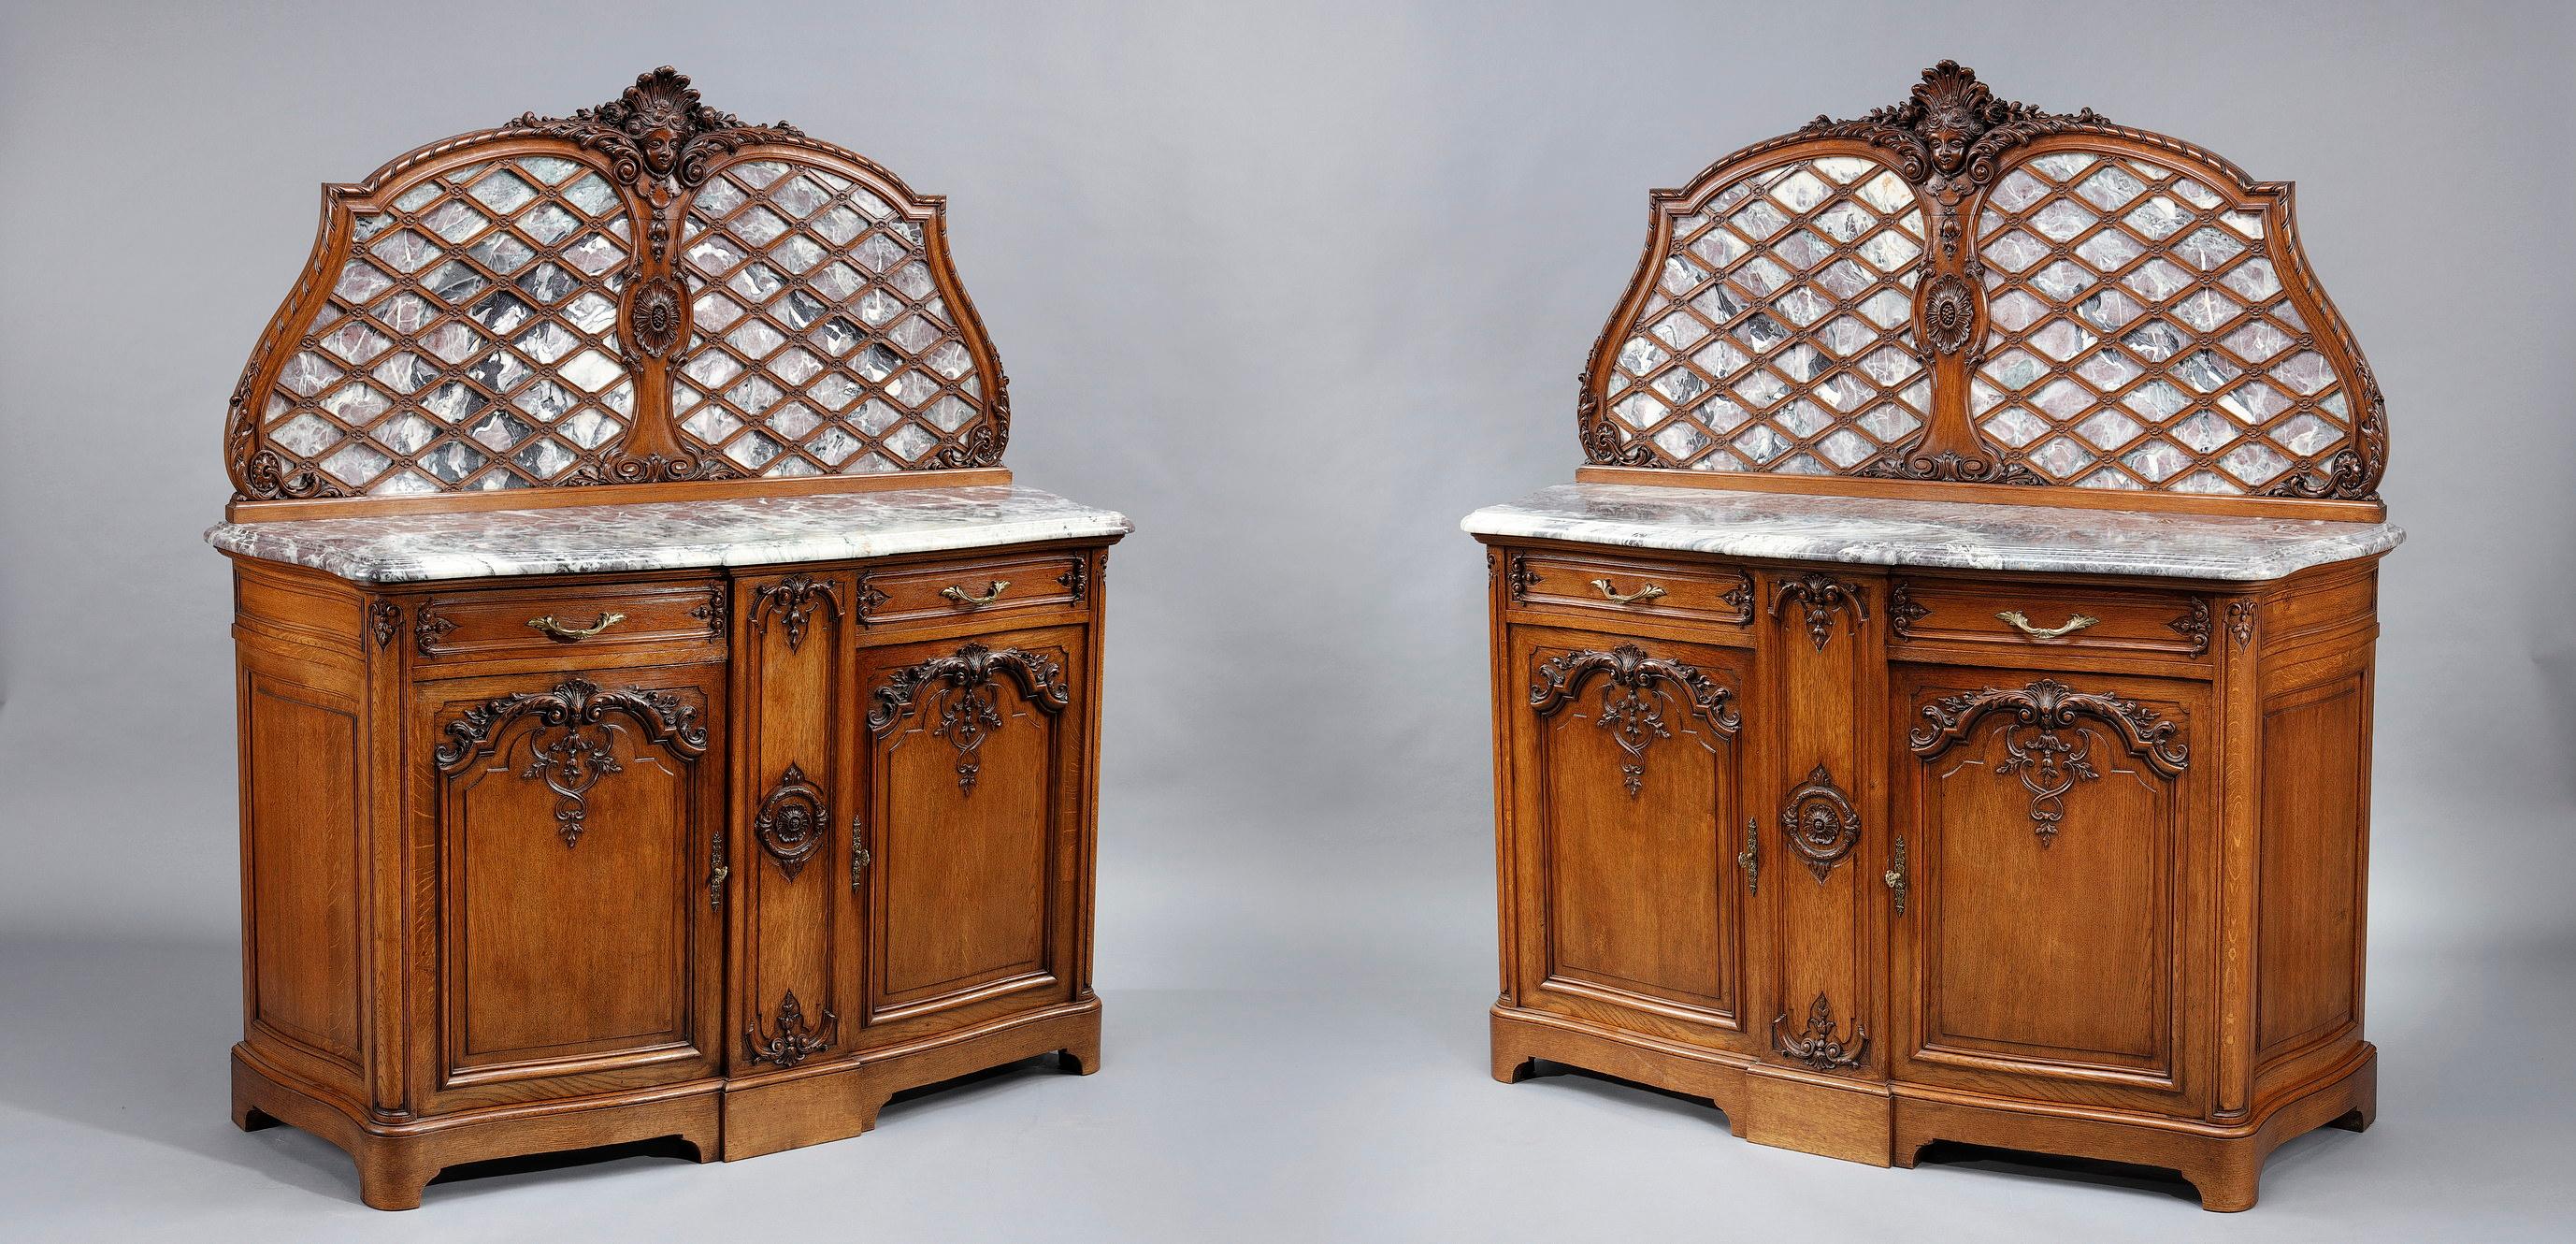 Pair of Regency-style sideboards in molded oak and marble For Sale 2